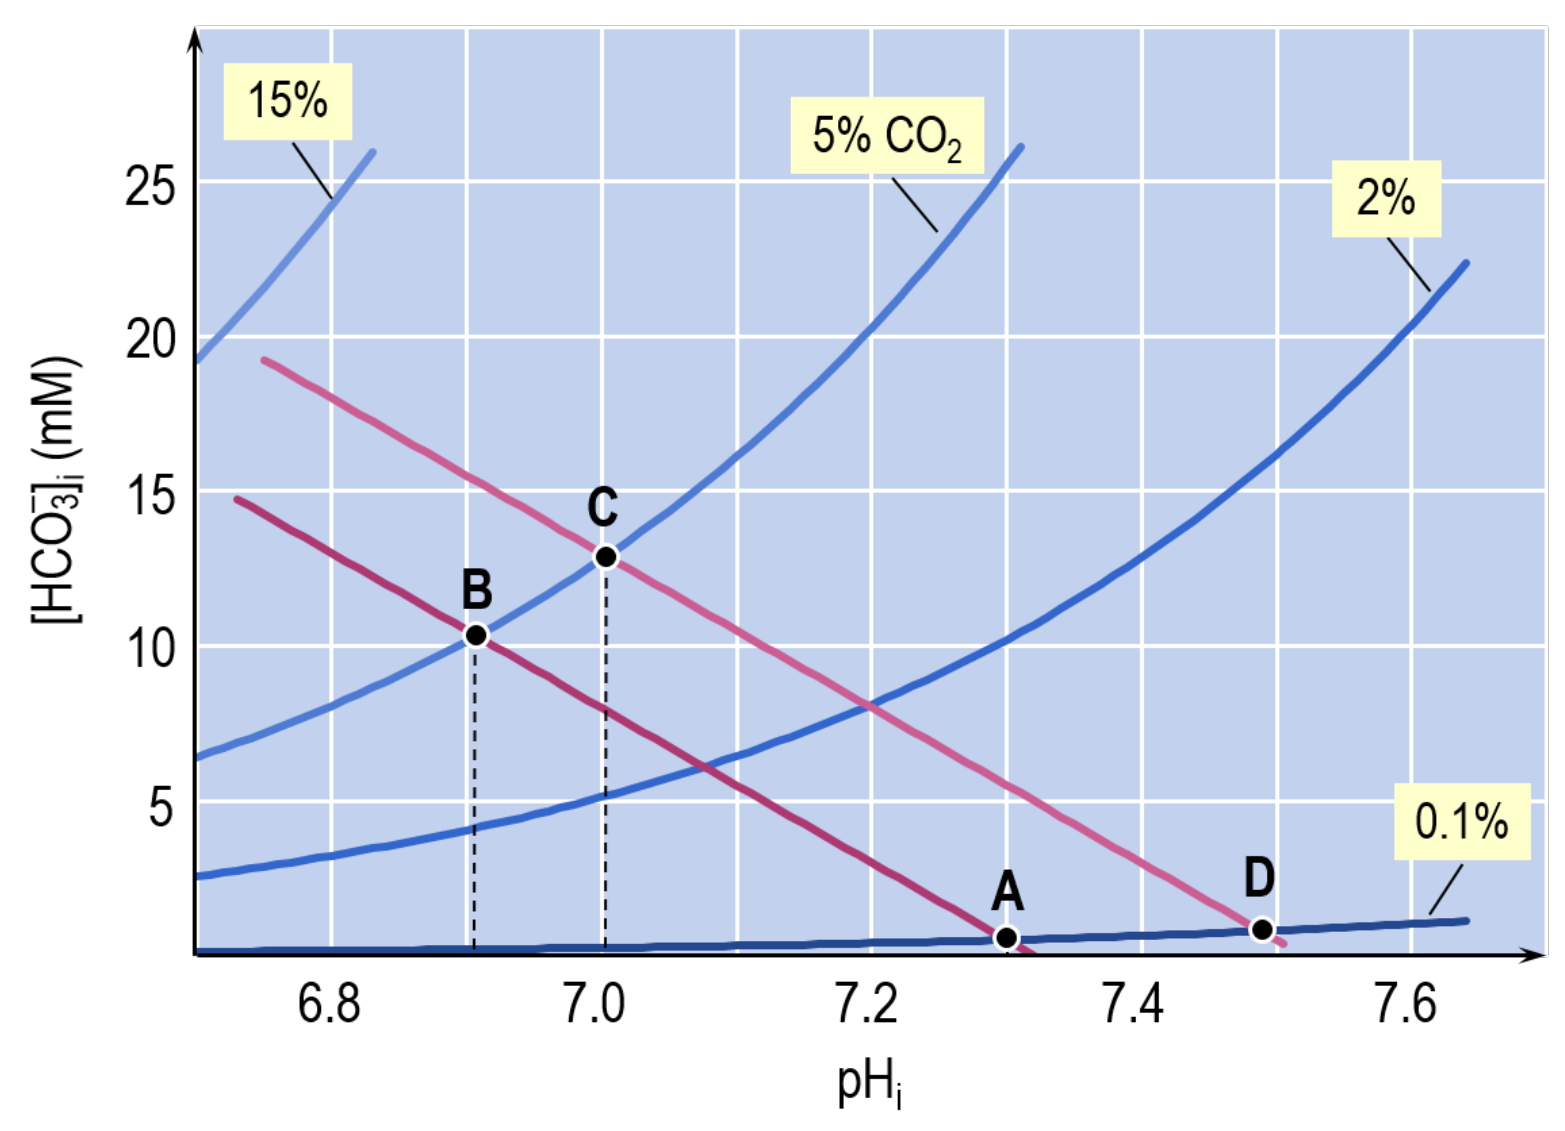 A Davenport diagram (from figure 5A of BDW). This nomogram consists of two kinds of plots. The first kind of plot is represented by the four \mathrm{CO_2} isopleths that slope upwards from left to right. Each isolpleth represents all possible combinations of \mathrm{[HCO_3^-]_i} and \mathrm{pH_i} for a given \mathrm{[CO_2]_i} (described here as the \% of the air phase that is \mathrm{CO_2}). The second kind of plot is represented by the two lines that slope downwards from left to right. The slope of these parallel lines describes the buffering power of non-\mathrm{CO_2}/\mathrm{HCO_3^-} buffers. BDW assumed that the experiment starts at point A, at \mathrm{pH_i} = 7.32 and 0.1\% \mathrm{CO_2}. The addition of 5\% \mathrm{CO_2} causes the \mathrm{pH_i} at equilibrium to fall to the point represented by point B. The extrusion of acid during the \mathrm{CO_2}/\mathrm{HCO_3^-} exposure causes the system to move along the 5\% \mathrm{CO_2} isopleth from point B to point C. Finally, upon removal of \mathrm{CO_2}/\mathrm{HCO_3^-}, the system returns to the original \mathrm{CO_2}/\mathrm{HCO_3^-} isopleth, but now at point D. The difference between points D and A represents the \mathrm{pH_i} overshoot. In the BDW paper, \beta — the slope of the lines in this figure — appeared to be 25 \mathrm{mM}/\mathrm{pH} unit. In fact, the value of \beta determined in the \mathrm{NH_3}/\mathrm{NH_4^+} experiments (also shown as a Davenport-like diagram in figure 5B of BDW) was 9 \mathrm{mM}/\mathrm{pH} unit. The reason for this discrepancy was probably that BDW delivered the \mathrm{CO_2}/\mathrm{HCO_3^-} solution to the axon using a peristaltic pump and Silastic tubing, which they later realised has a high \mathrm{CO_2} permeability. Thus, the \mathrm{[CO_2]} reaching the axon was <5\%, accounting for the artificially inflated value for \beta. In their follow-up paper , BDW delivered the \mathrm{CO_2}/\mathrm{HCO_3^-} solutions from glass syringes and through Saran tubing, which has an extremely low \mathrm{CO_2} permeability.